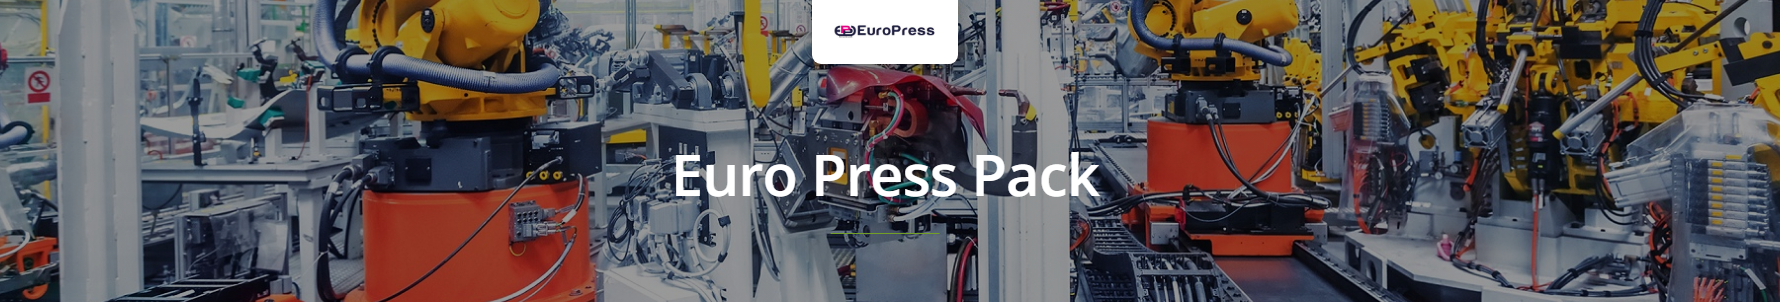 Euro Press Pack Hydraulic Cylinders